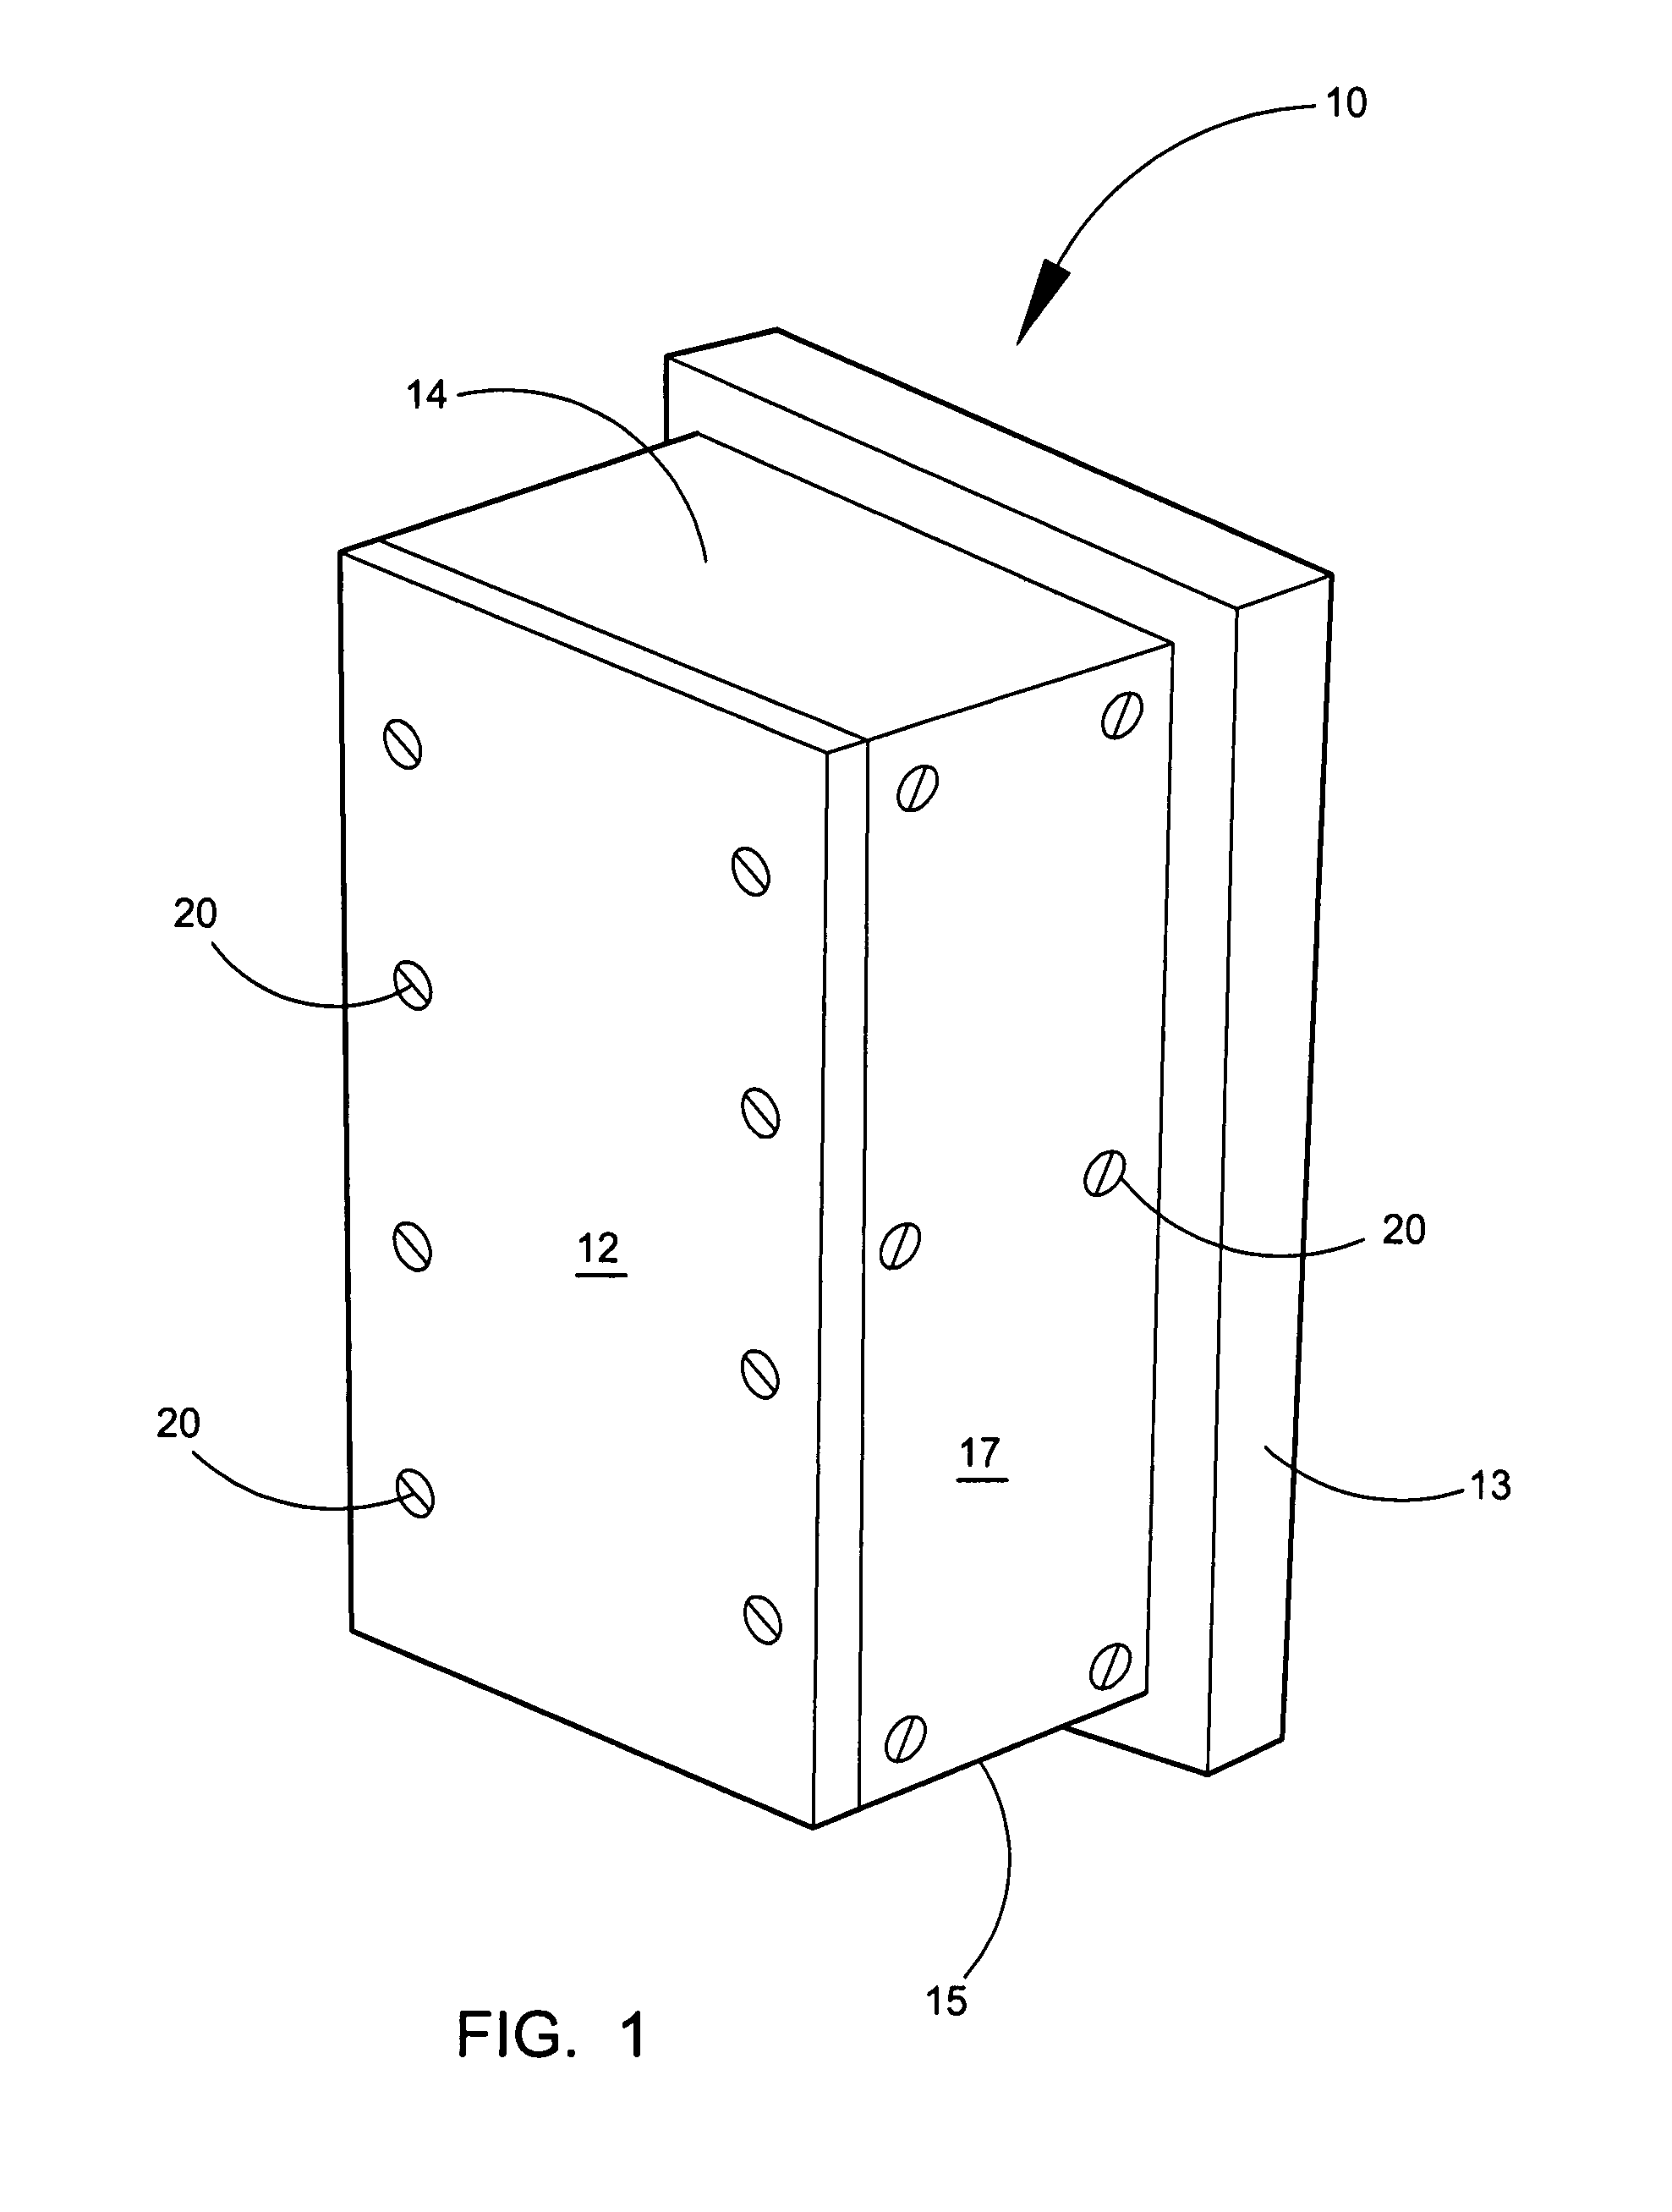 Displacement instrument for determining the modulus of a material